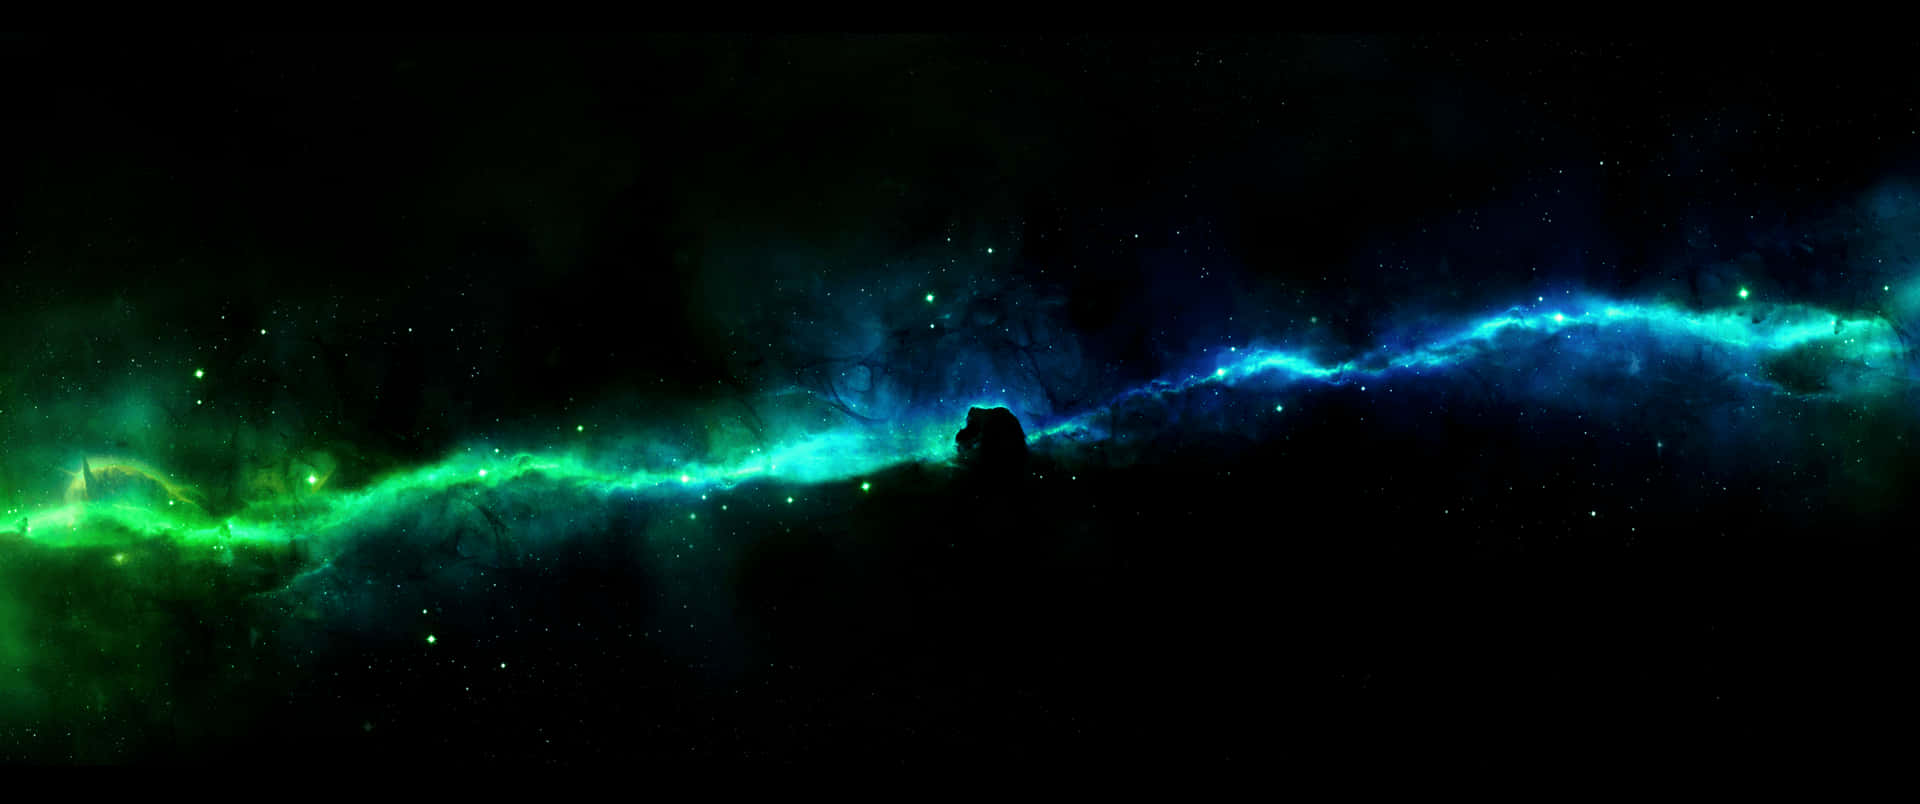 3440x1440 Space Green And Blue Galaxy Wallpaper